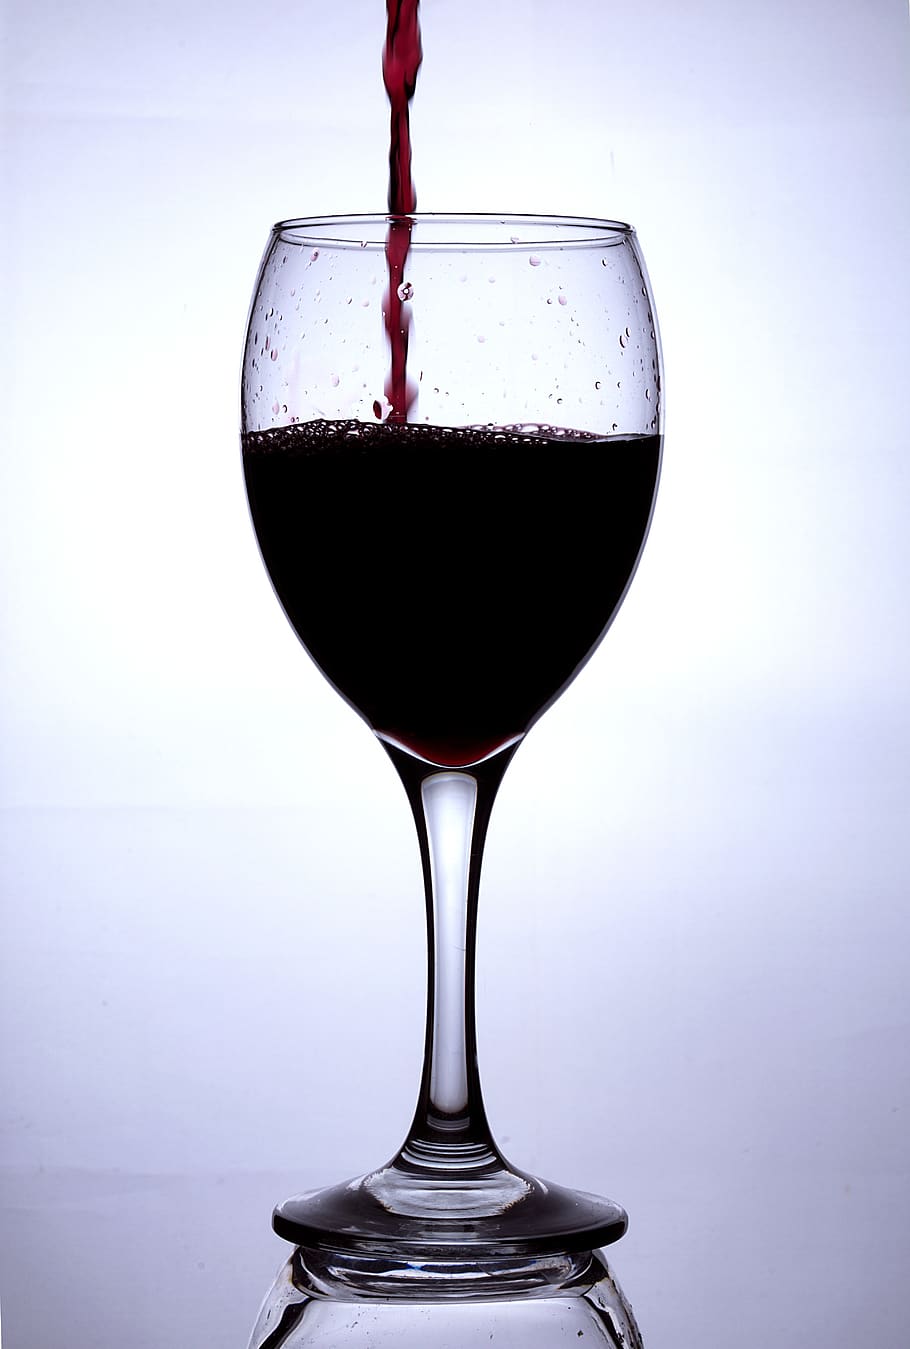 wineglass, red wine, wine, glass, pouring, still life, wine glass, drink, refreshment, food and drink